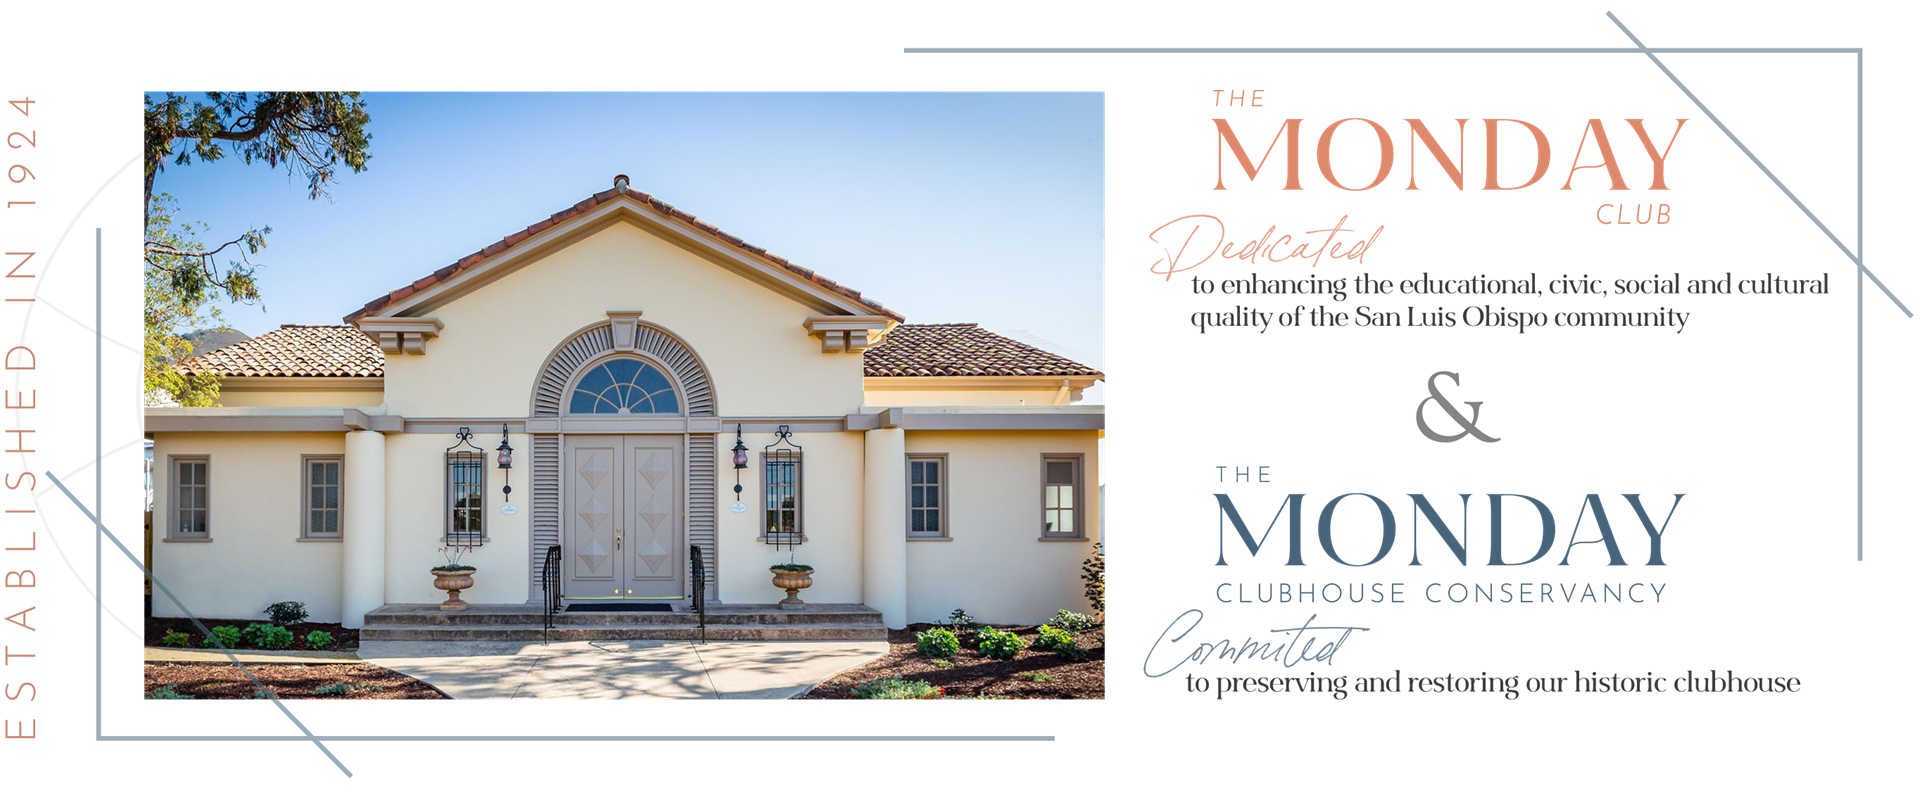 The Monday Club is dedicated to enhancing the educational, civic, social and cultural quality of the San Luis Obispo Community. The Monday Clubhouse Conservancy is committed to preserving and restoring our historic clubhouse.